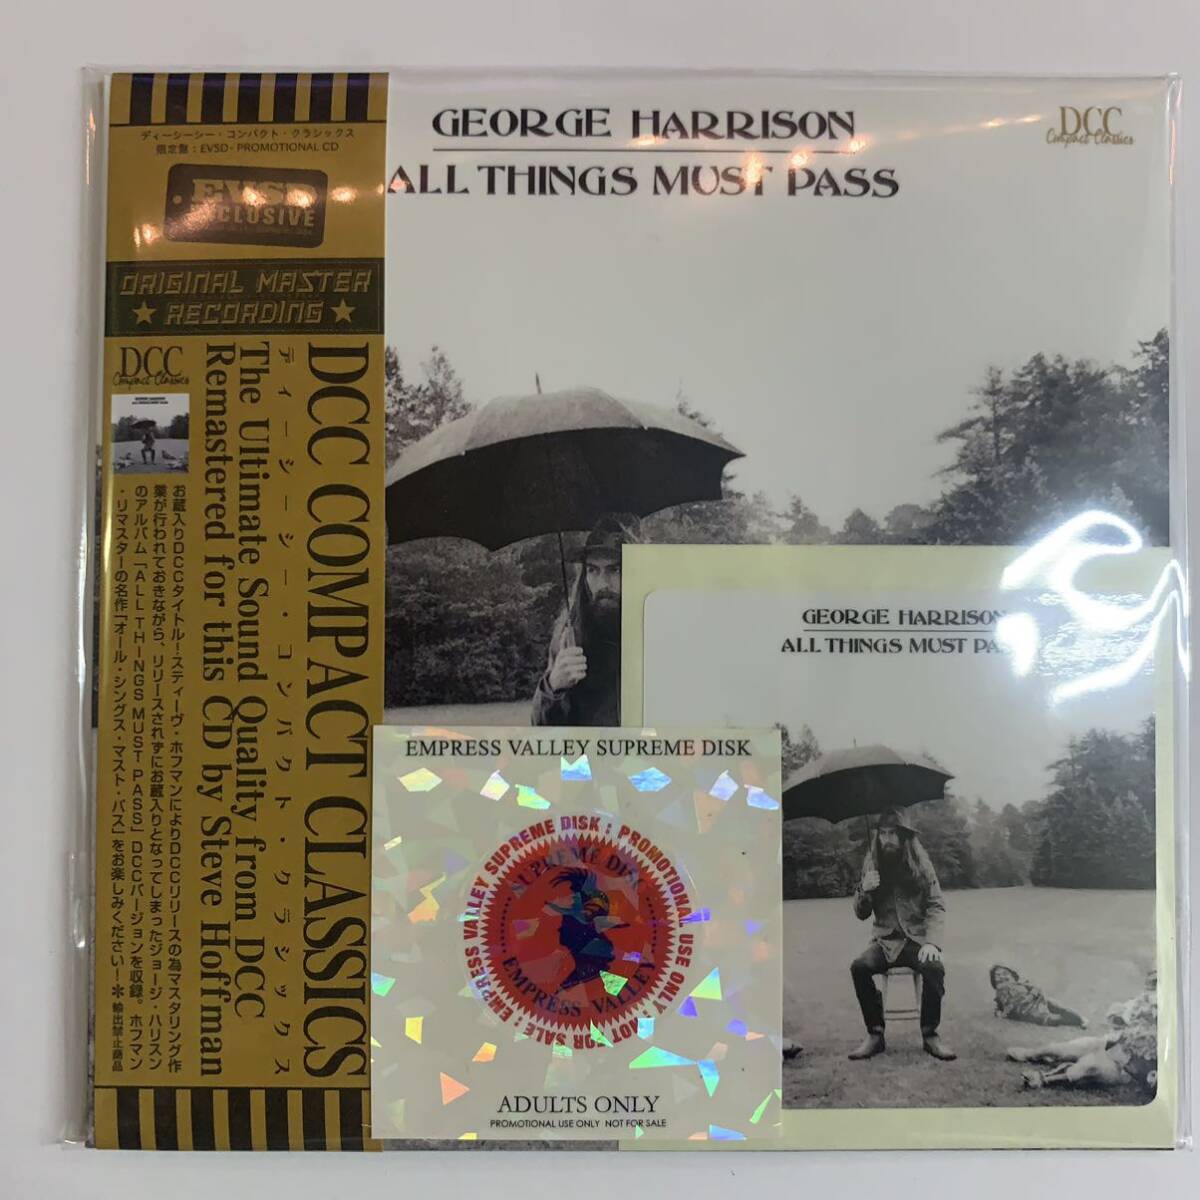 GEORGE HARRISON / ALL THINGS MUST PASS DCC COMPACT CLASSICS Remastered by Steve Hoffman (CD) 「帯付き紙ジャケット仕様限定盤」_画像1